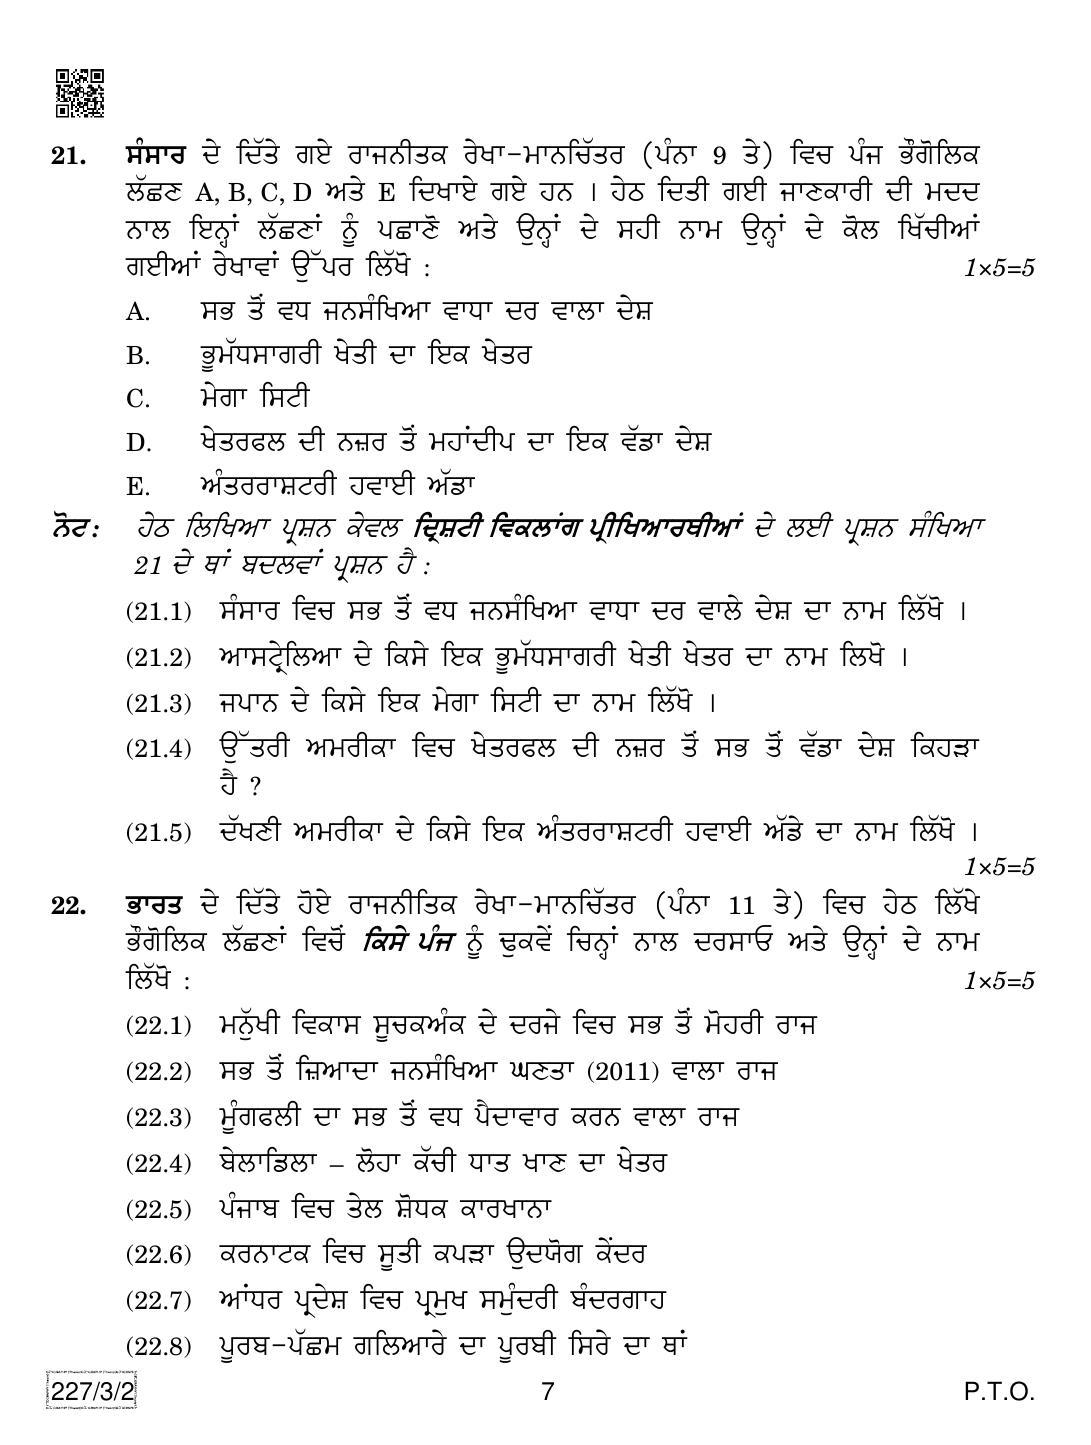 CBSE Class 12 227-3-2 Geography (Punjabi) 2019 Question Paper - Page 7